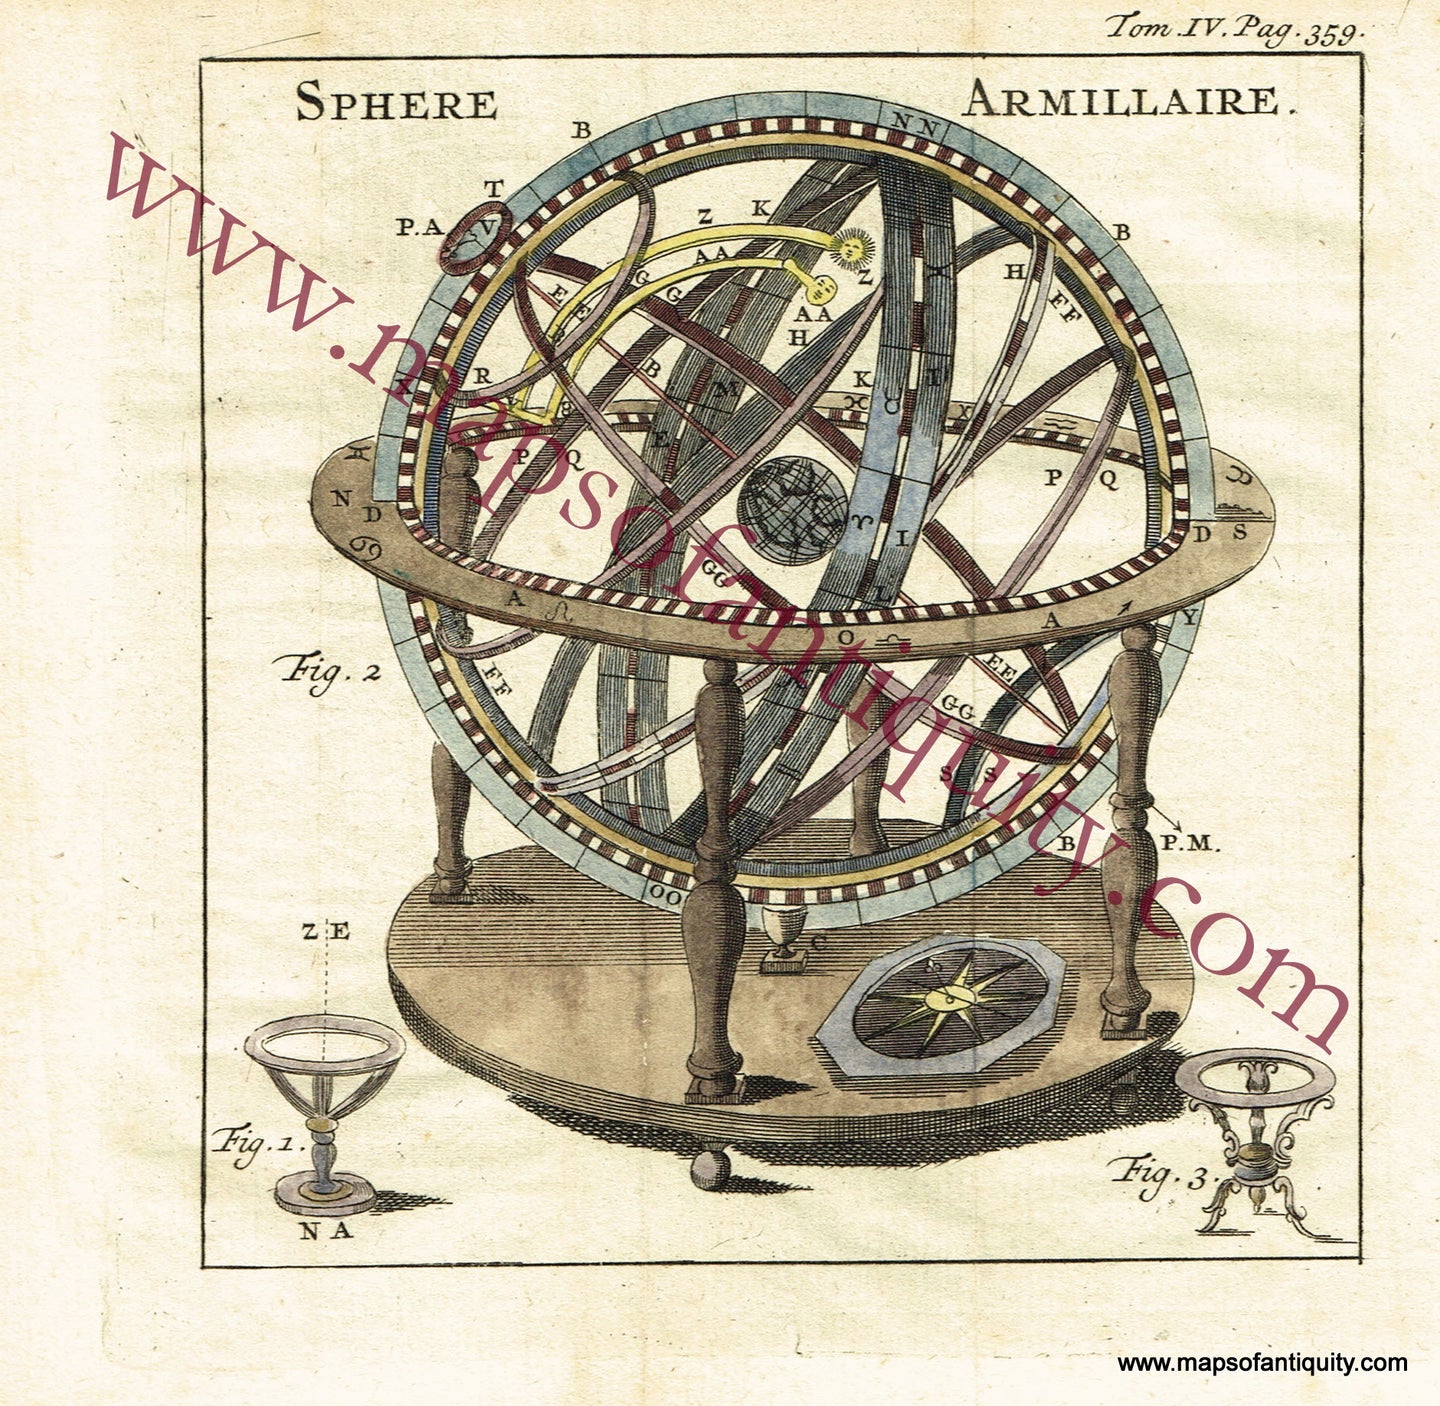 Antique-Hand-Colored-Print-Sphere-Armillaire-******-Celestial--1730-Pluche-Maps-Of-Antiquity